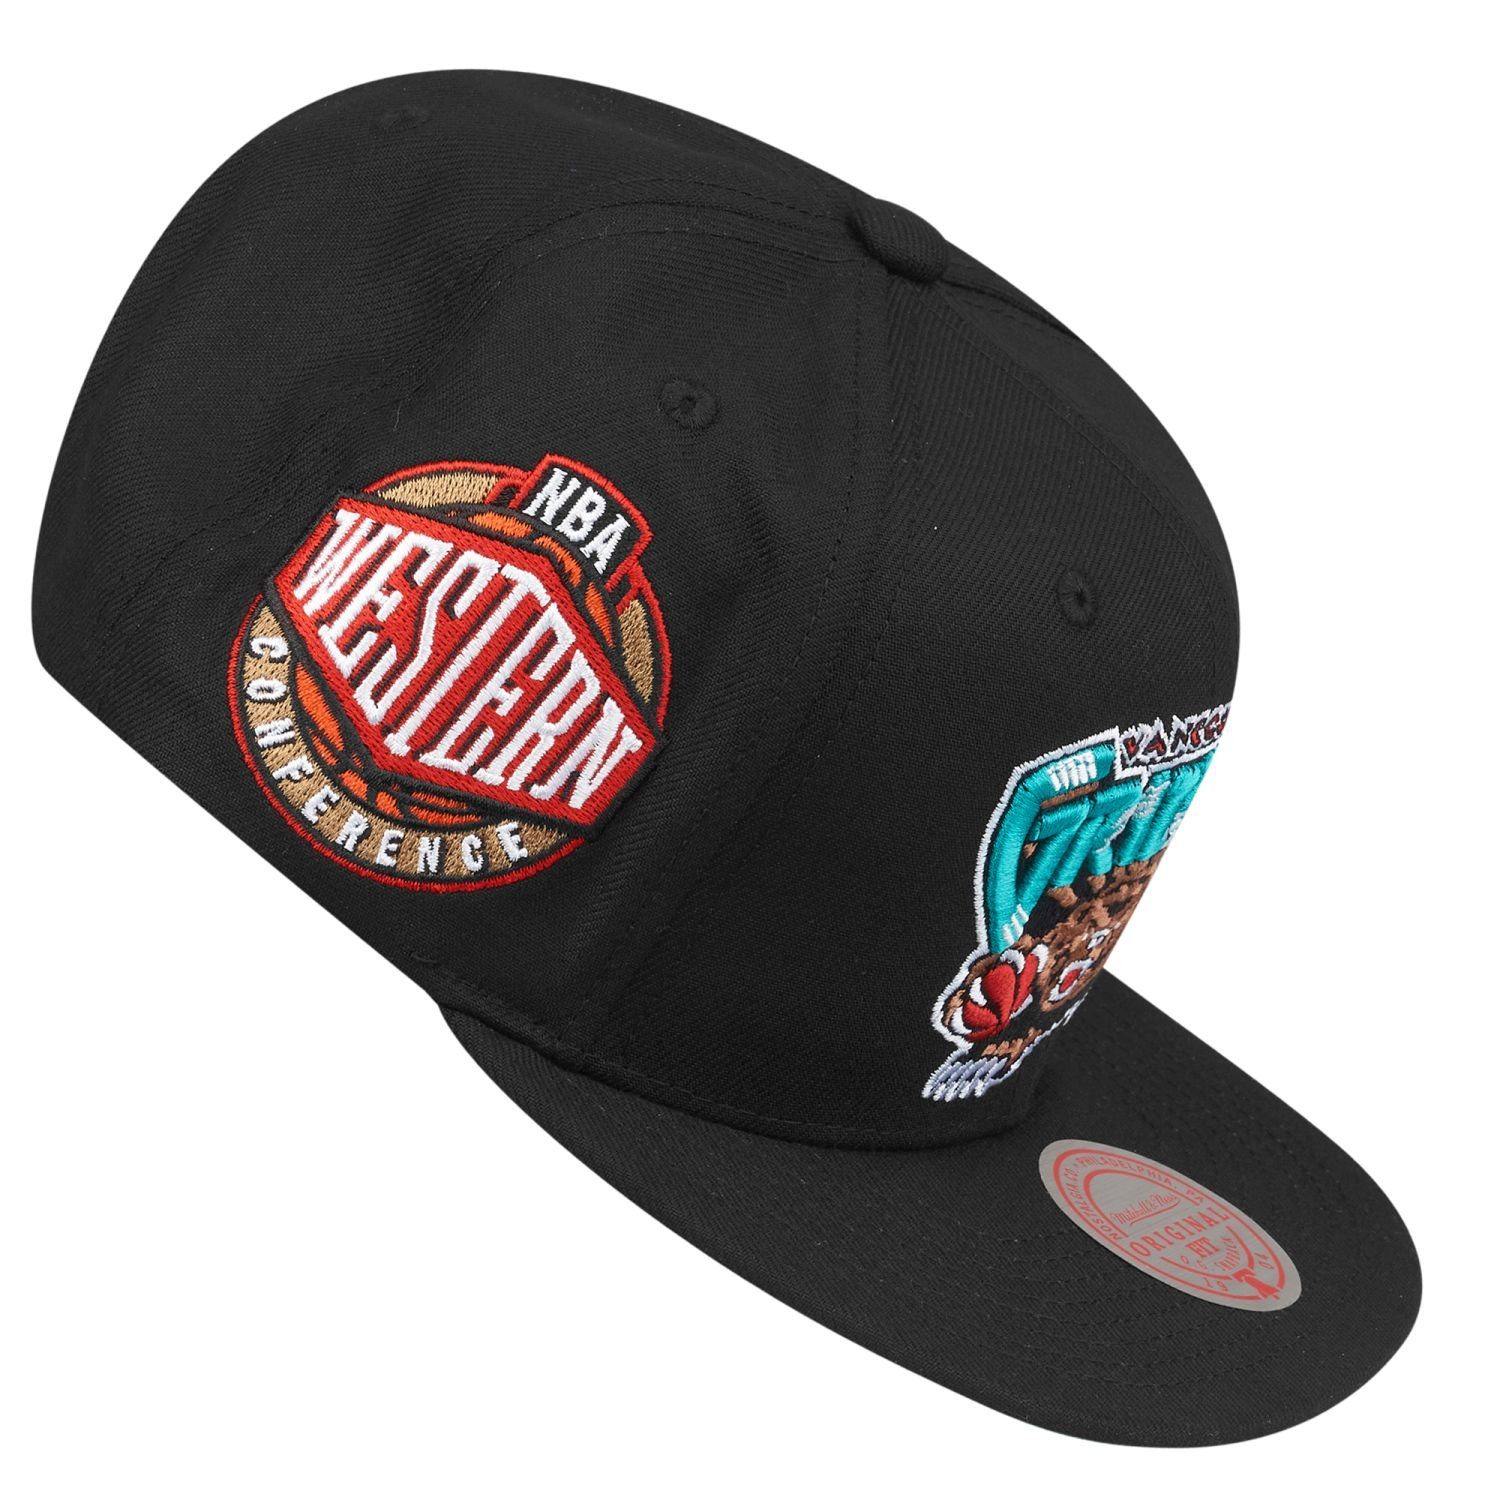 SIDEPATCH & Grizzlies Snapback Cap Ness Mitchell Vancouver